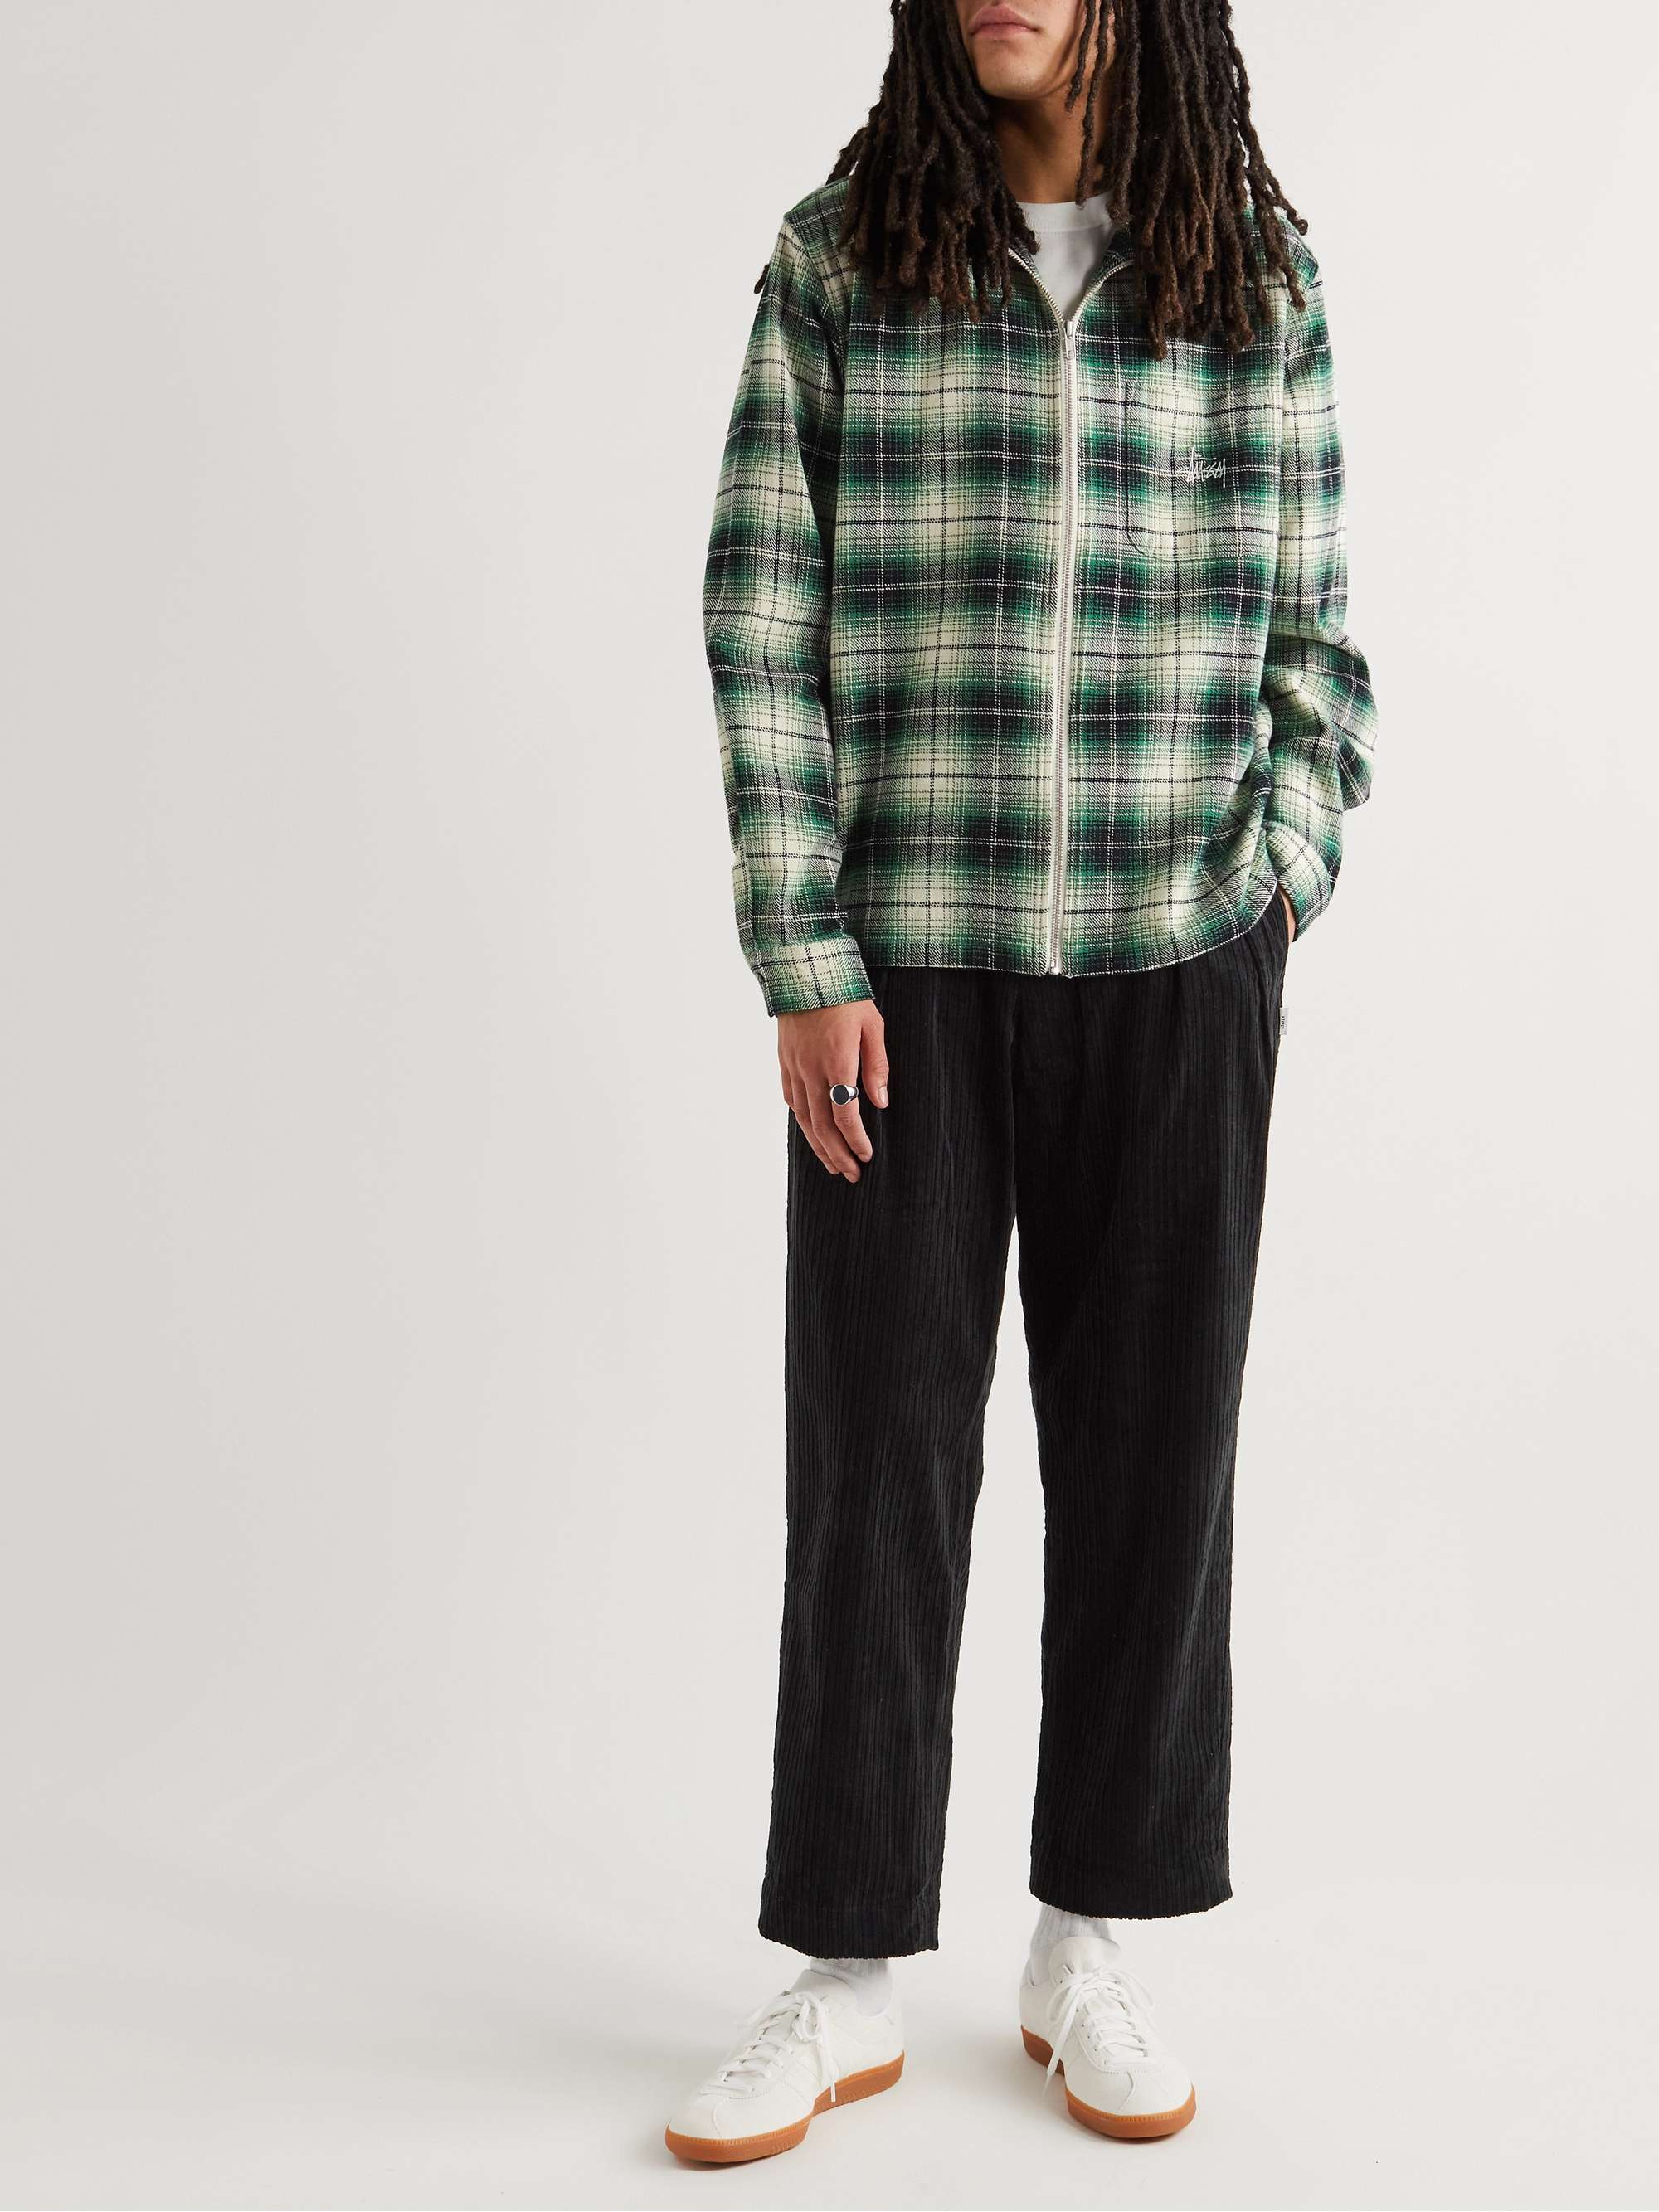 STÜSSY Frank Corduroy-Trimmed Checked Cotton-Flannel Shirt Jacket